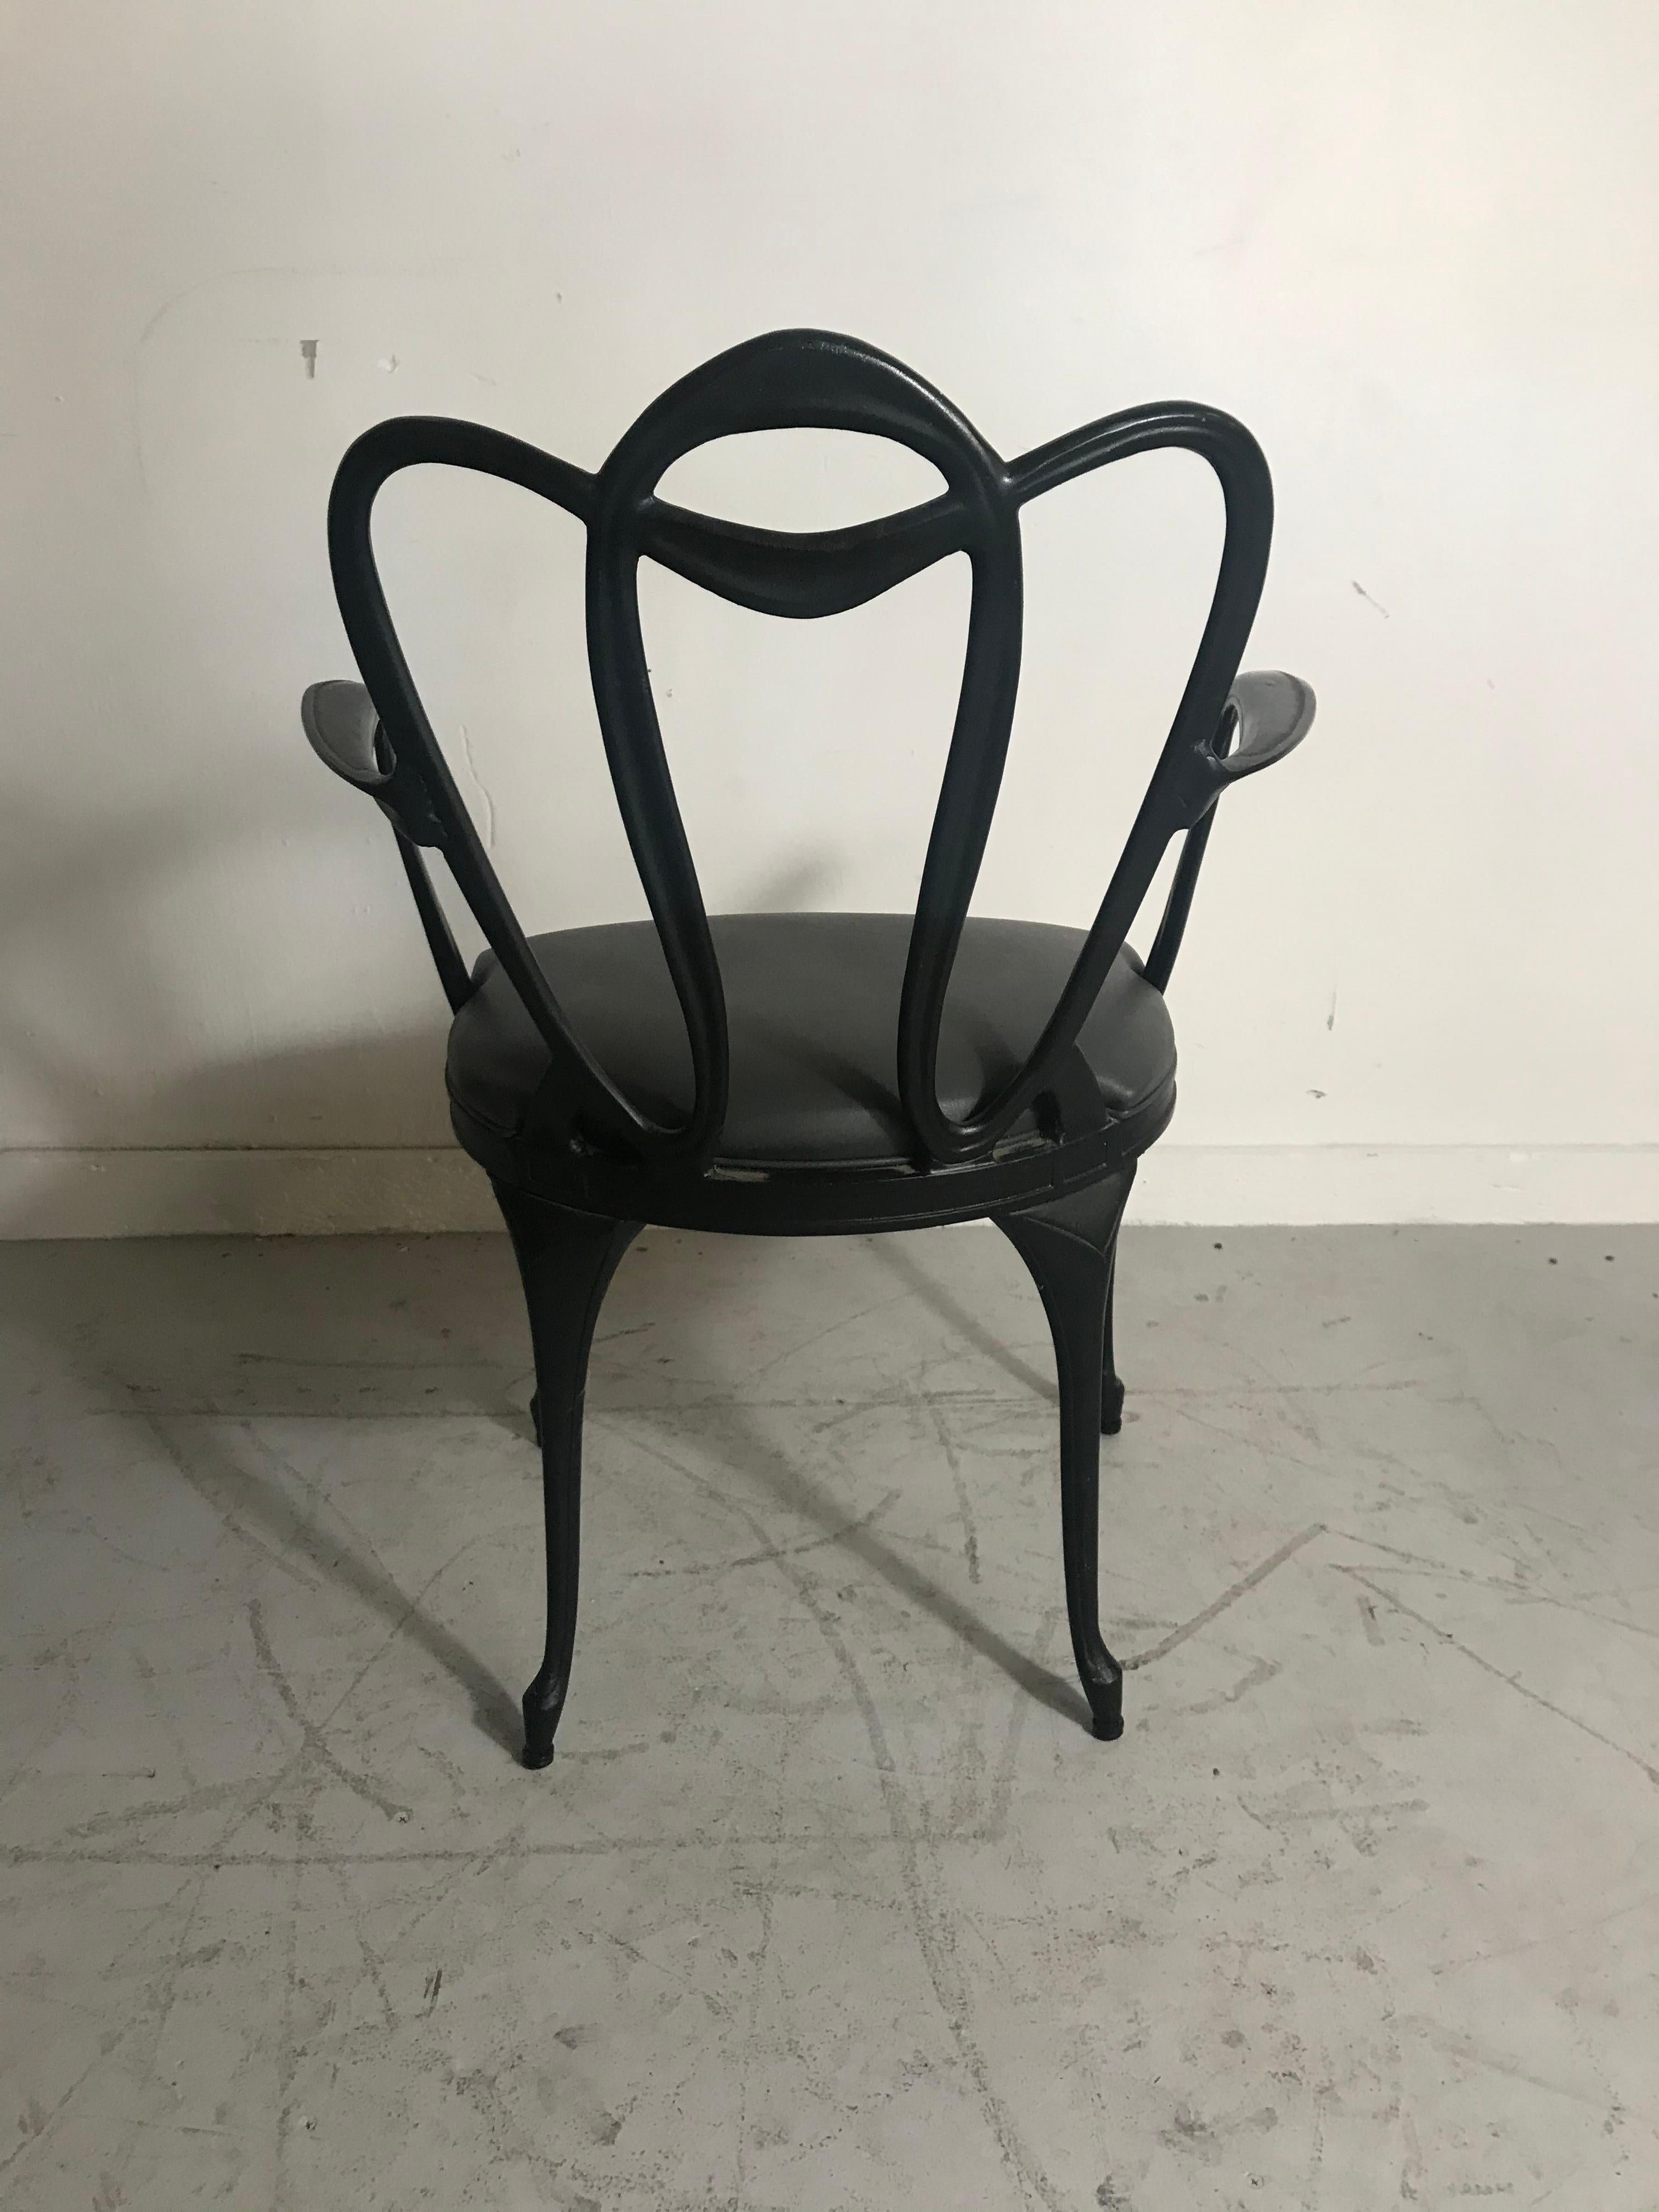 American Art Nouveau Style Cast Aluminum Armchair by Crucible Products Corp. 1960